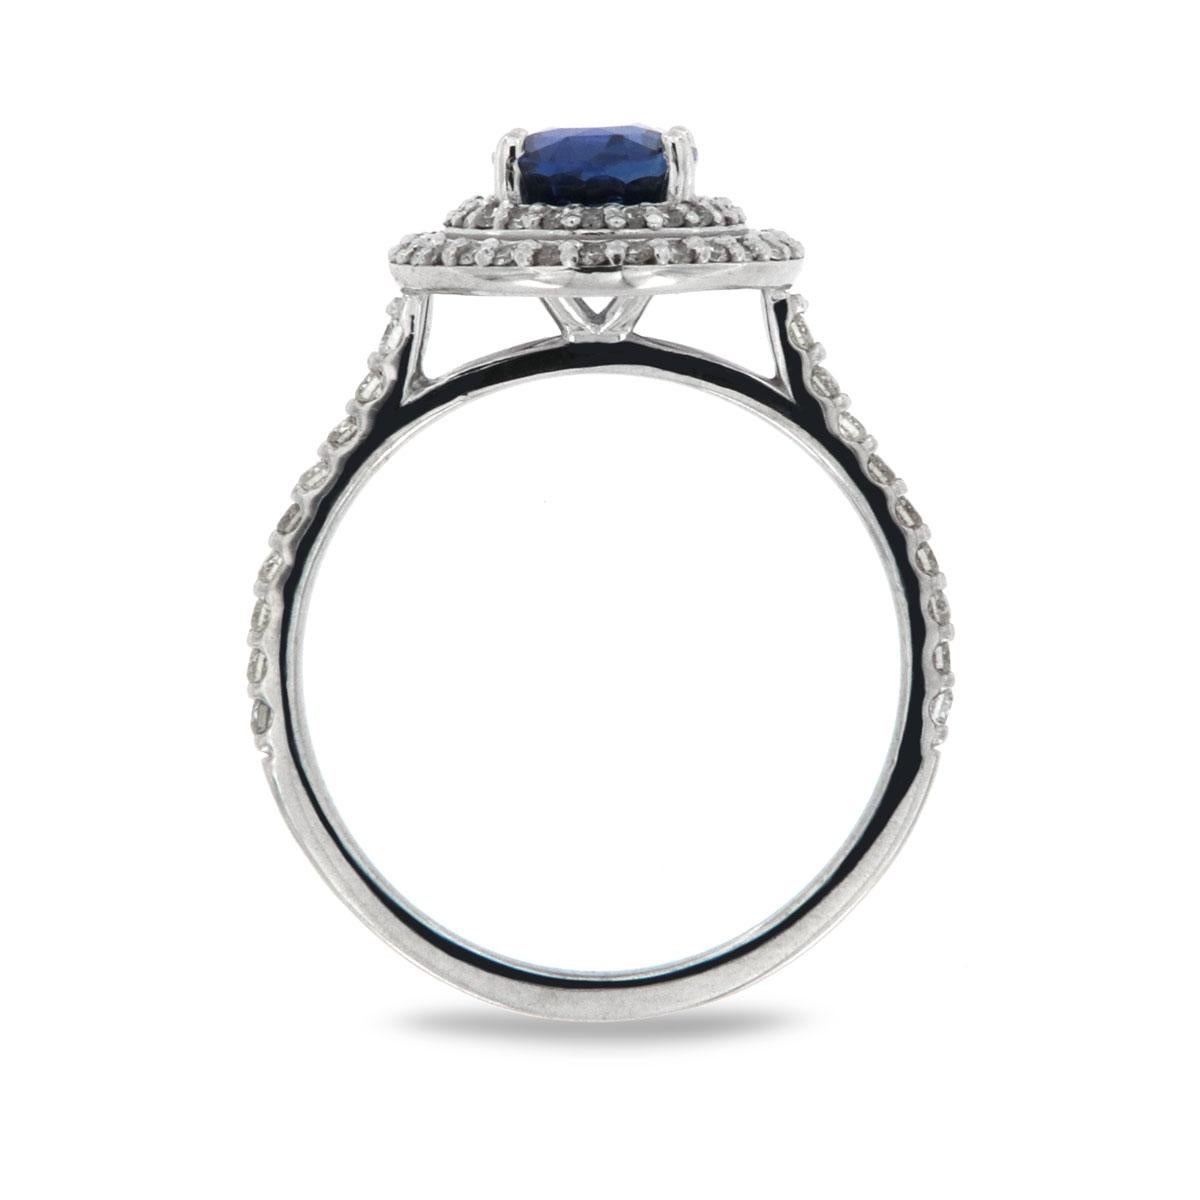 A petite double halo of diamonds surrounds the center 2.02 carat Sapphire in this stunning 14k white gold setting.

Product details: 

Center Gemstone Type: SAPPHIRE
Center Gemstone Carat Weight: 2.02
Center Gemstone Measurements: 8.09 X 5.97 X